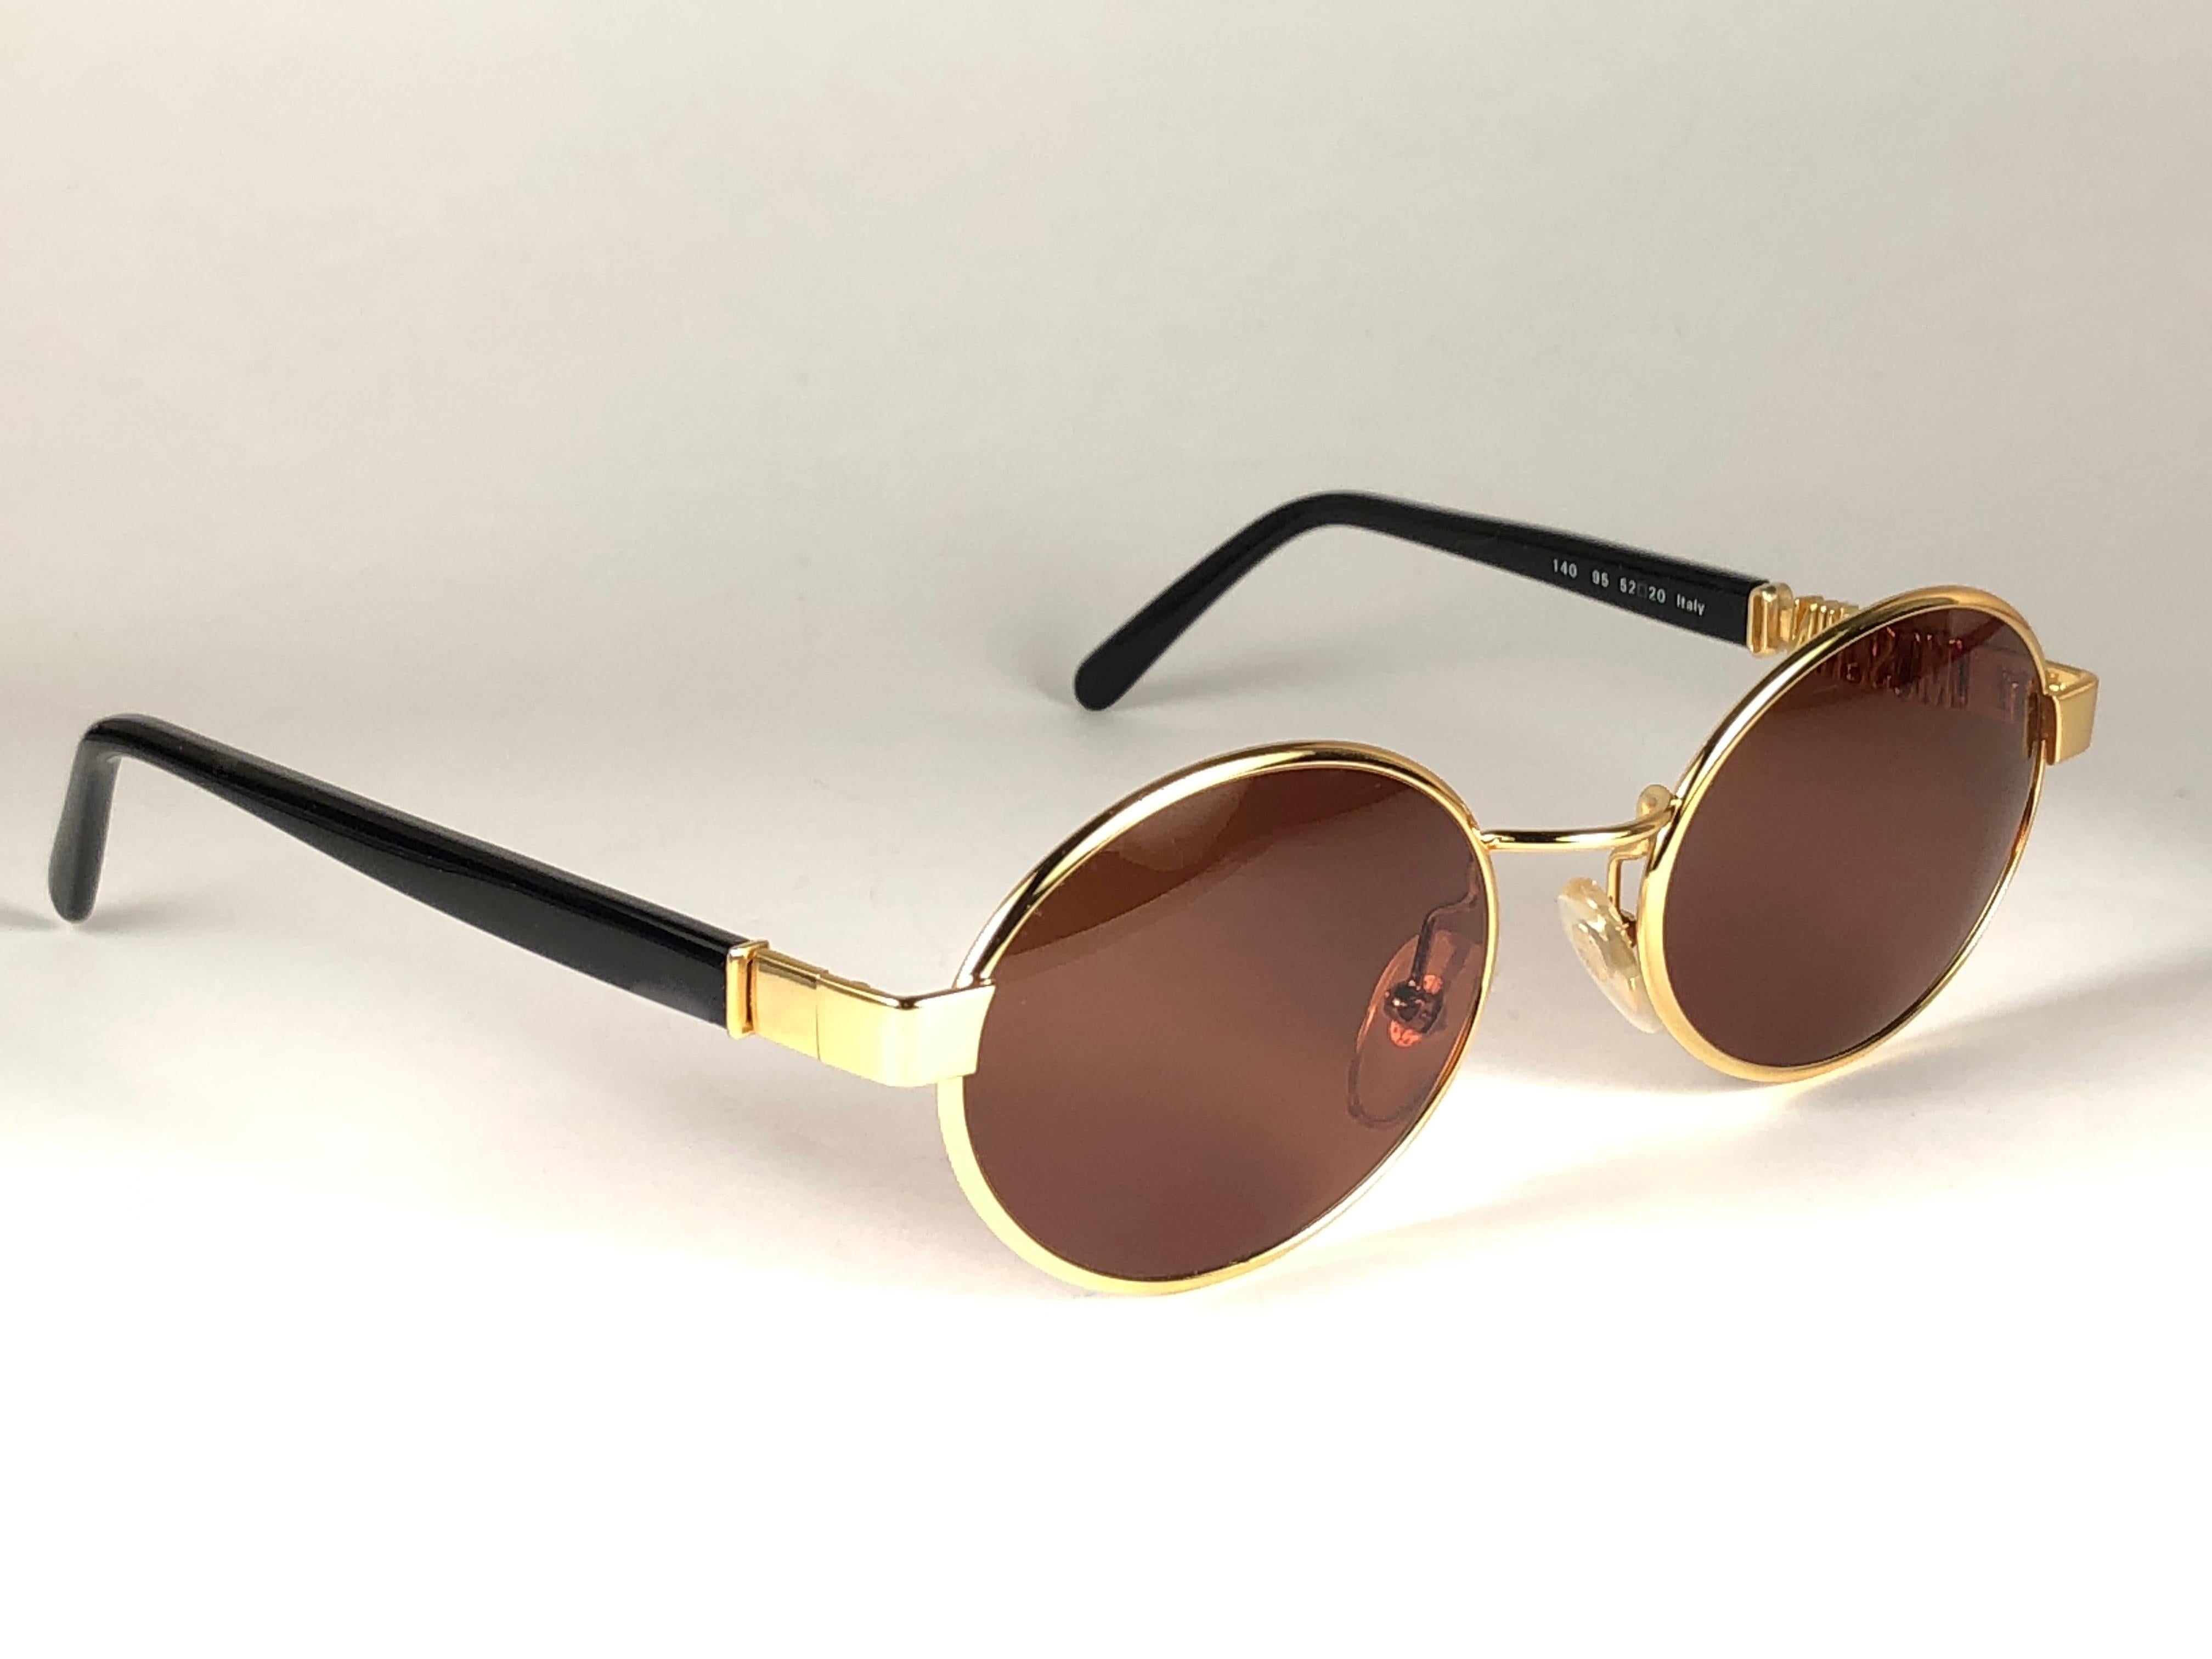 Mint Vintage Moschino small oval gold with details frame. Spotless brown lenses.

Made in Italy.
 
Produced and design in 1990's.

This item may show minor sign of wear due to storage.